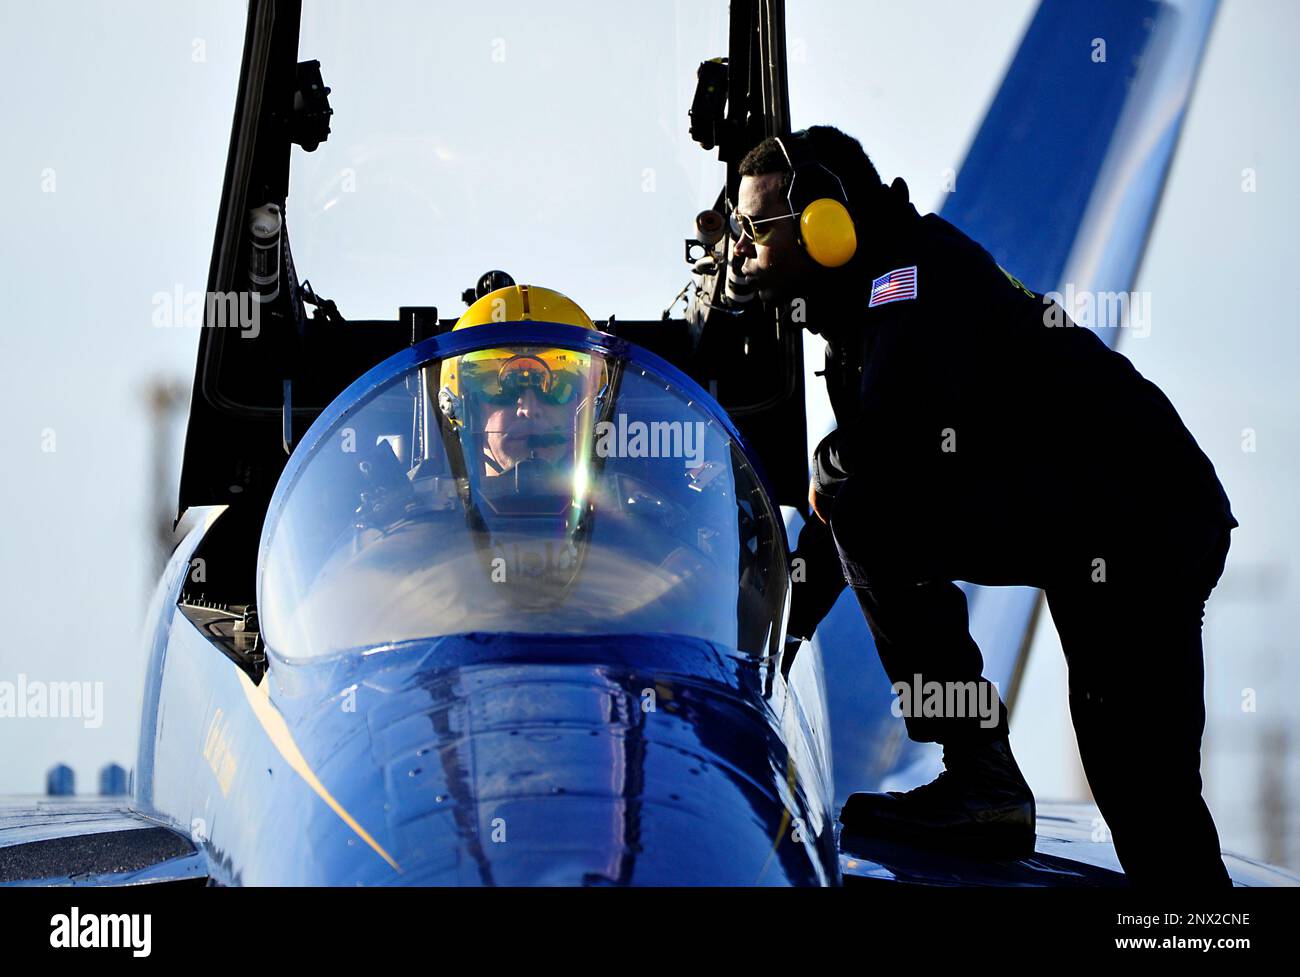 230118-N-KB563-1265 EL CENTRO, Calif. (Jan. 18, 2023) Cmdr. Alex Armatas, commanding officer and flight leader of the U.S. Navy Flight Demonstration Squadron, the Blue Angels, prepares for takeoff prior to a training flight over Naval Air Facility (NAF) El Centro. The Blue Angels are currently conducting winter training at NAF El Centro, California, in preparation for the upcoming 2023 air show season. Stock Photo